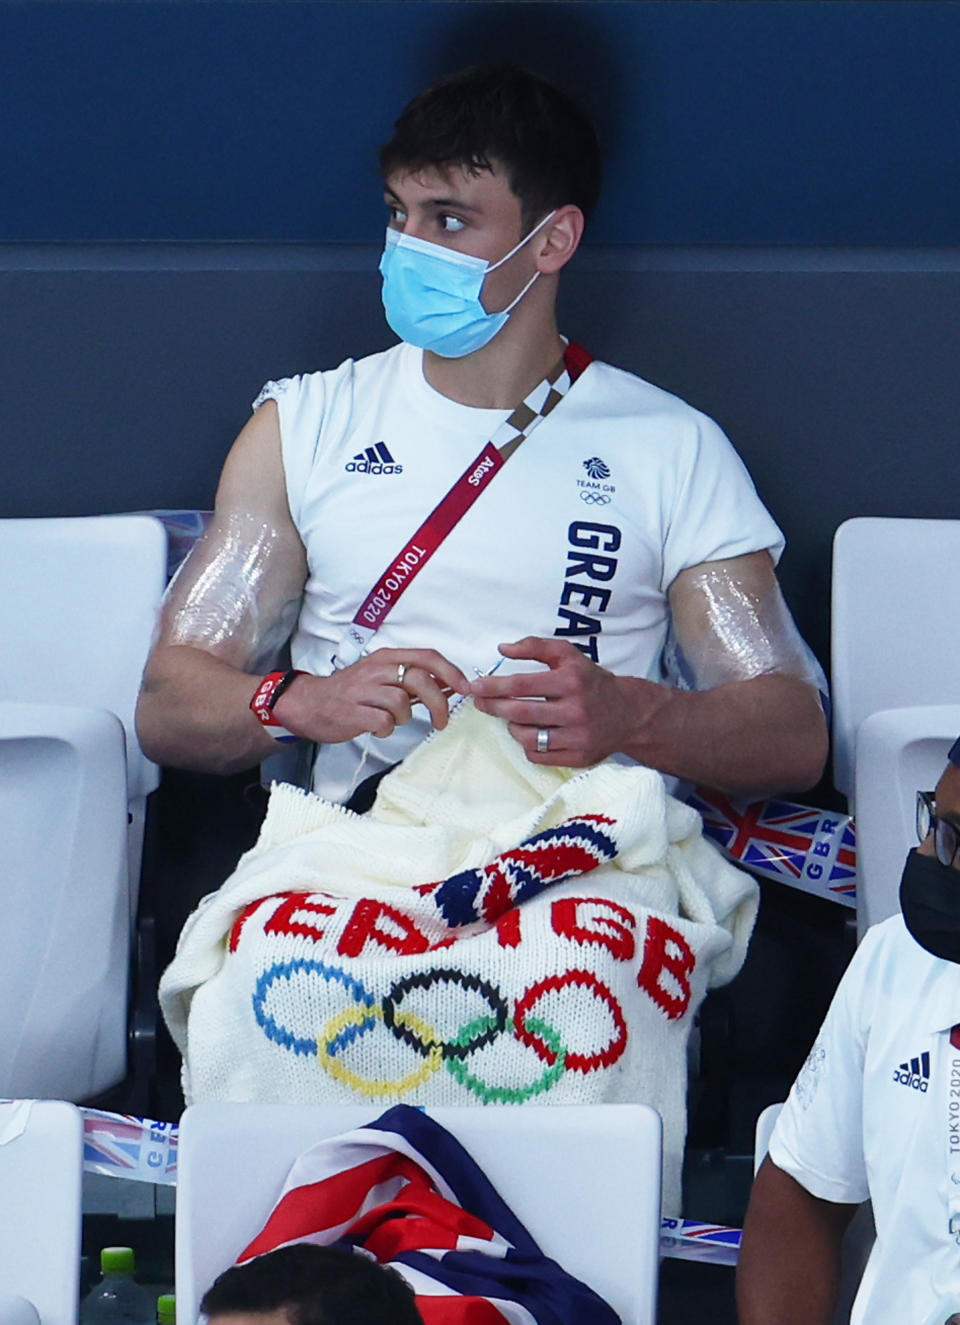 TOKYO, JAPAN - AUGUST 02: Tom Daley of Team Great Britain knits during the Men&#39;s 3m Springboard Preliminary Round on day ten of the Tokyo 2020 Olympic Games at Tokyo Aquatics Centre on August 02, 2021 in Tokyo, Japan. (Photo by Clive Rose/Getty Images)